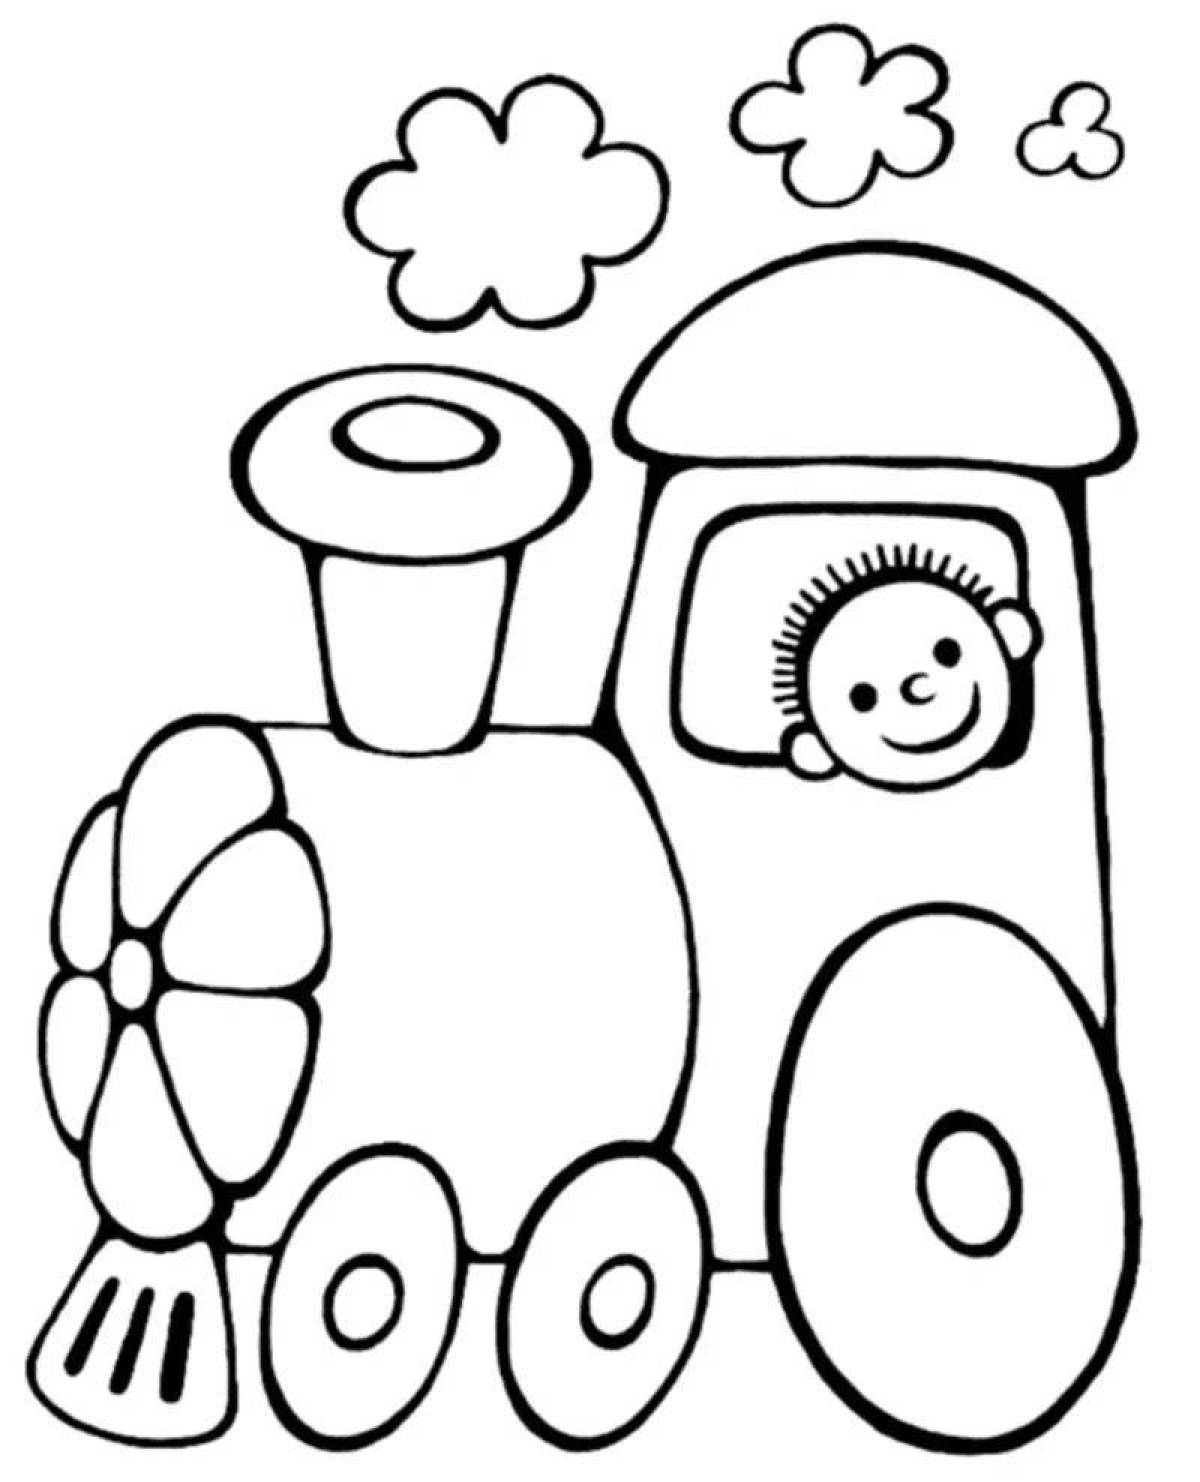 Surprise colorful coloring page for kids page 2